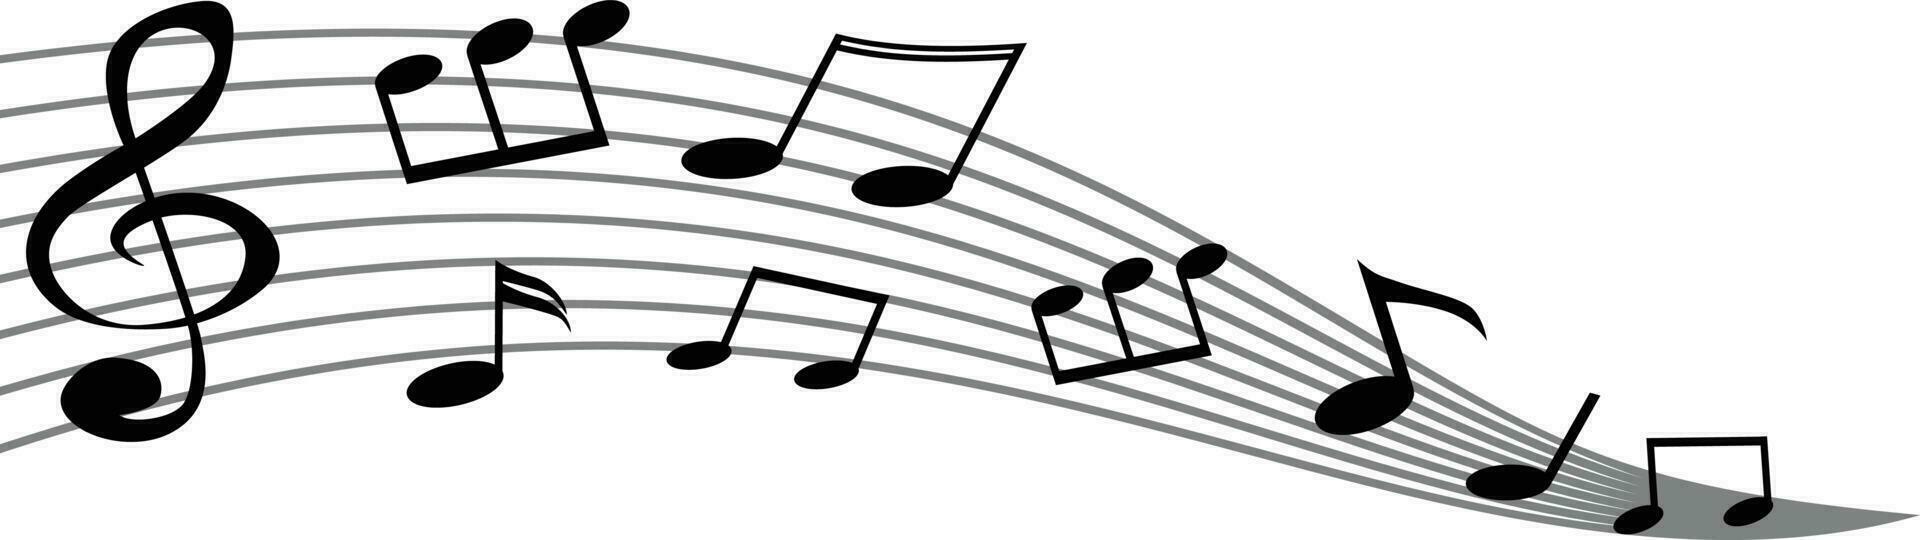 Music notes wave Vector Design